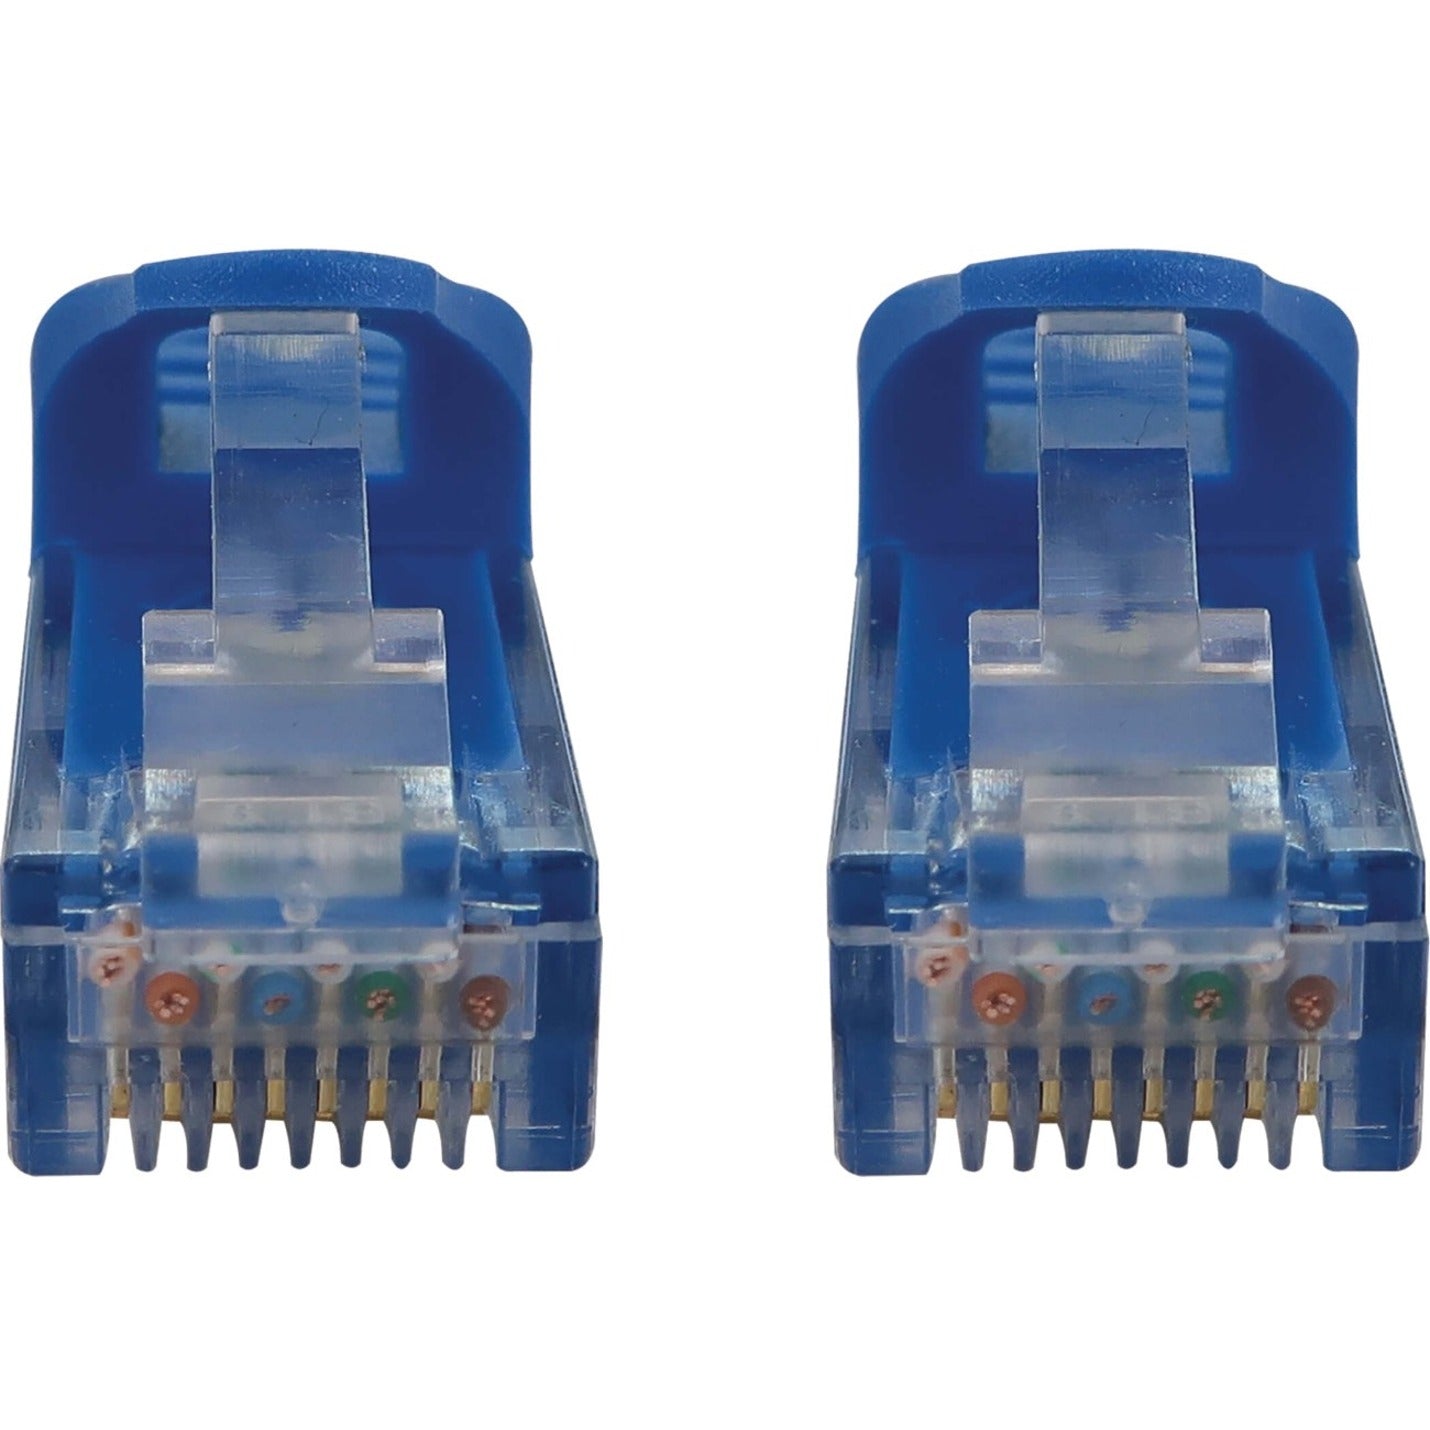 Tripp Lite N261-007-BL Cat.6a UTP Network Cable, 7ft Blue, 10G PoE, Snagless Molded